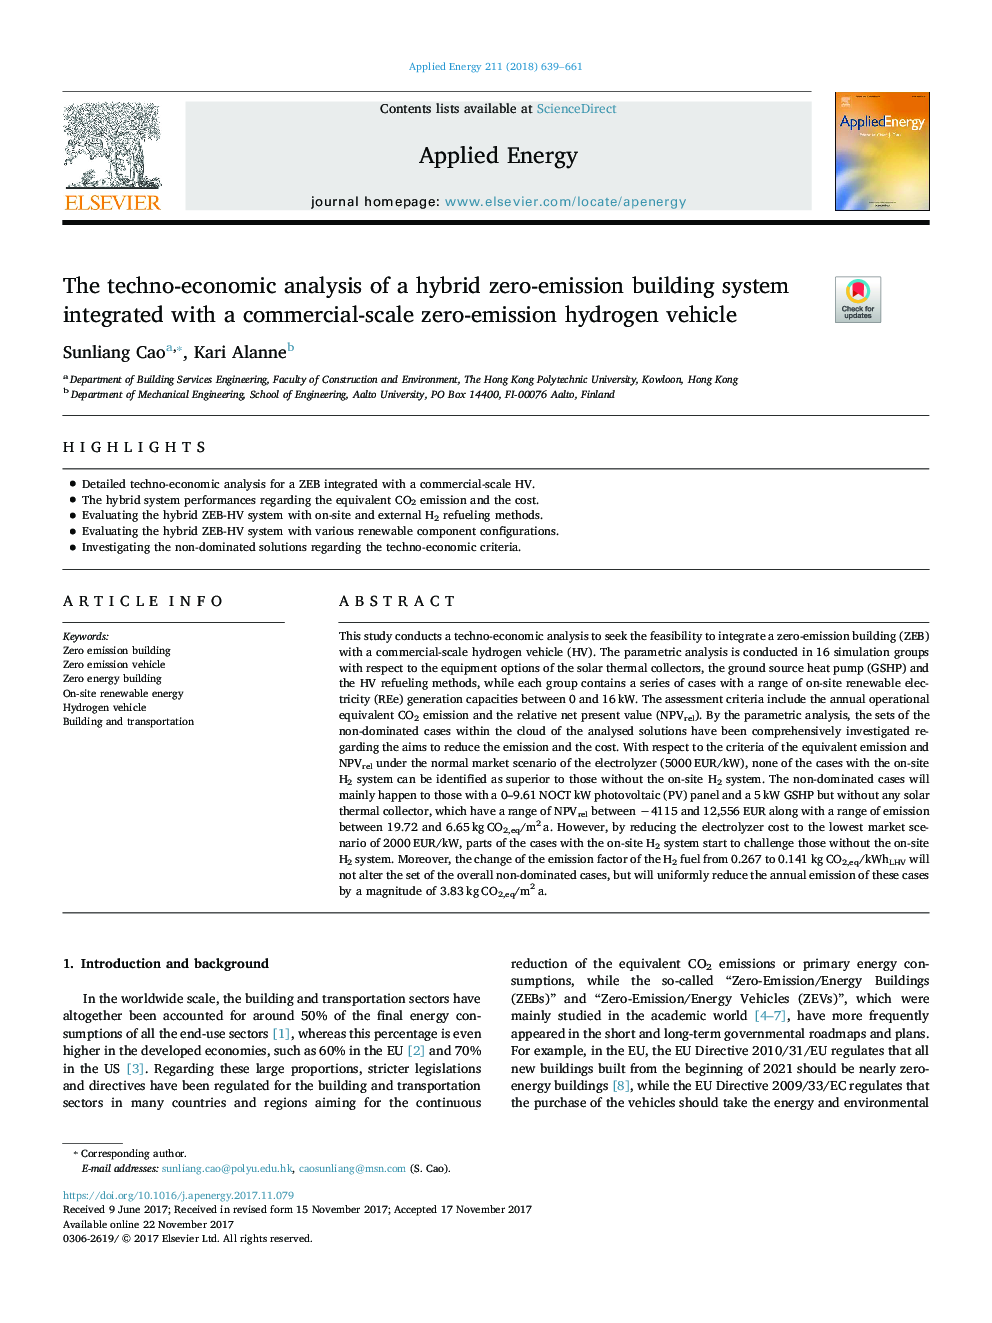 The techno-economic analysis of a hybrid zero-emission building system integrated with a commercial-scale zero-emission hydrogen vehicle